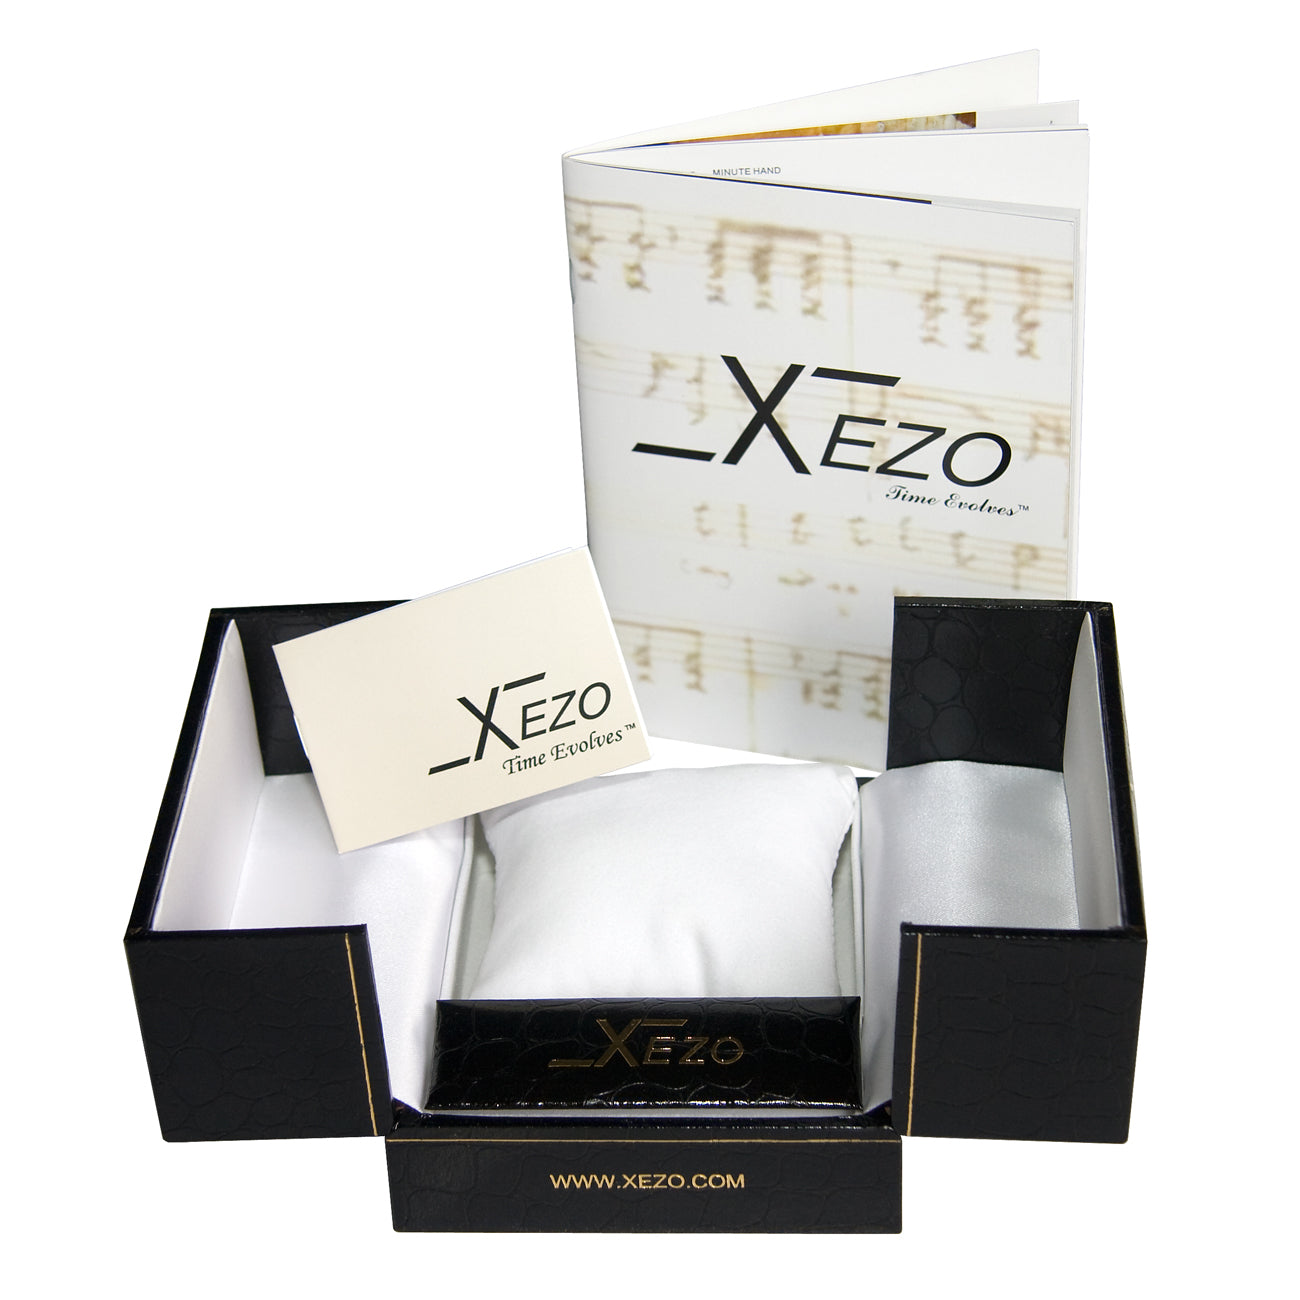 Xezo - Black gift box, certificate, and manual of the Architect 2001 L-B Tank watch